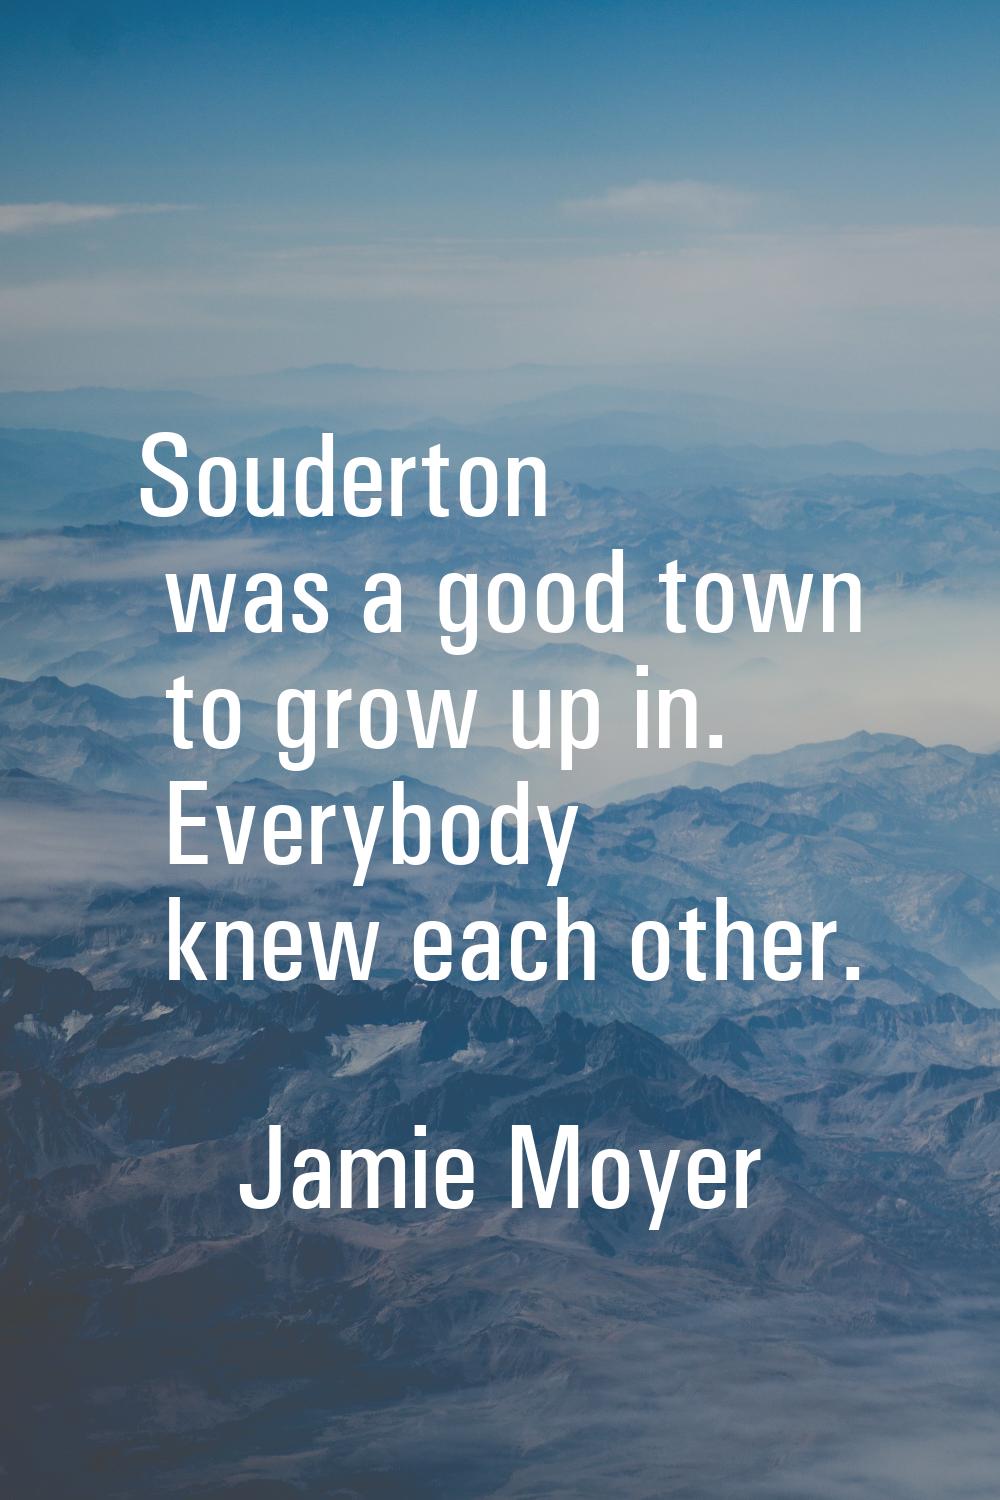 Souderton was a good town to grow up in. Everybody knew each other.